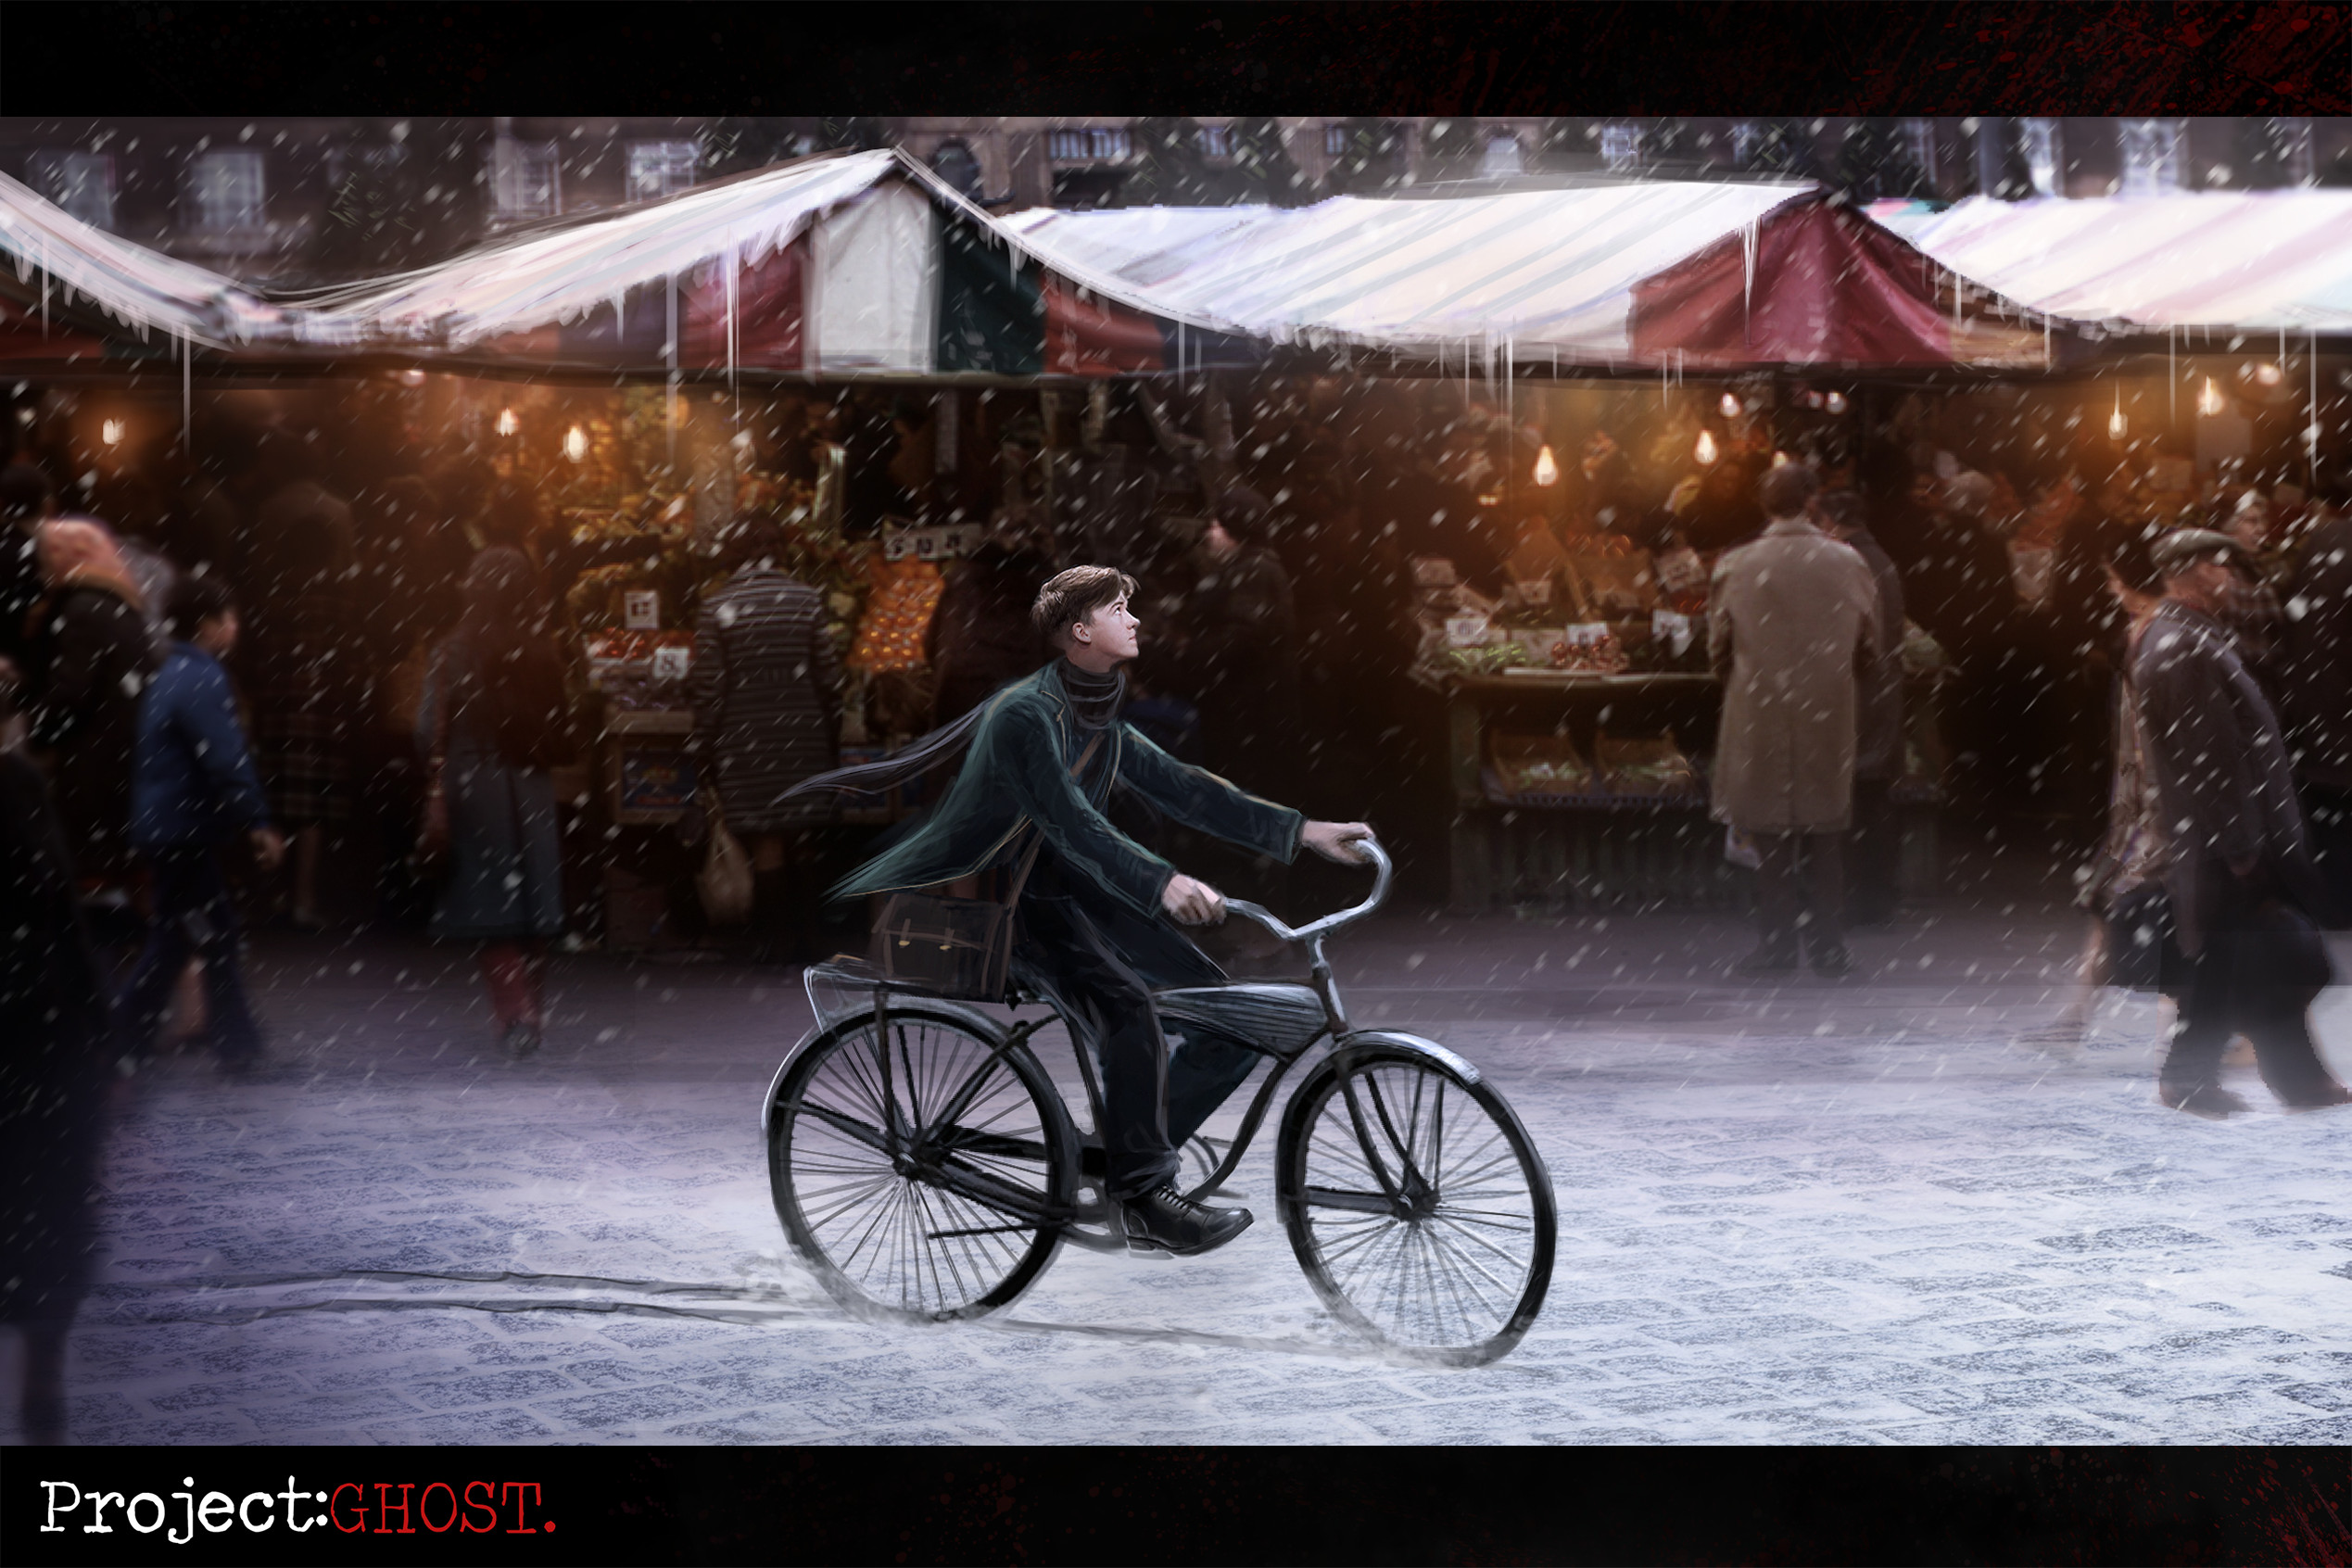 Thumbnail 1: Flynn Reed, a 17 year old boy (before his death) cycling through the market in Rivenbrook. (Photobash inspired by old Norwich.)